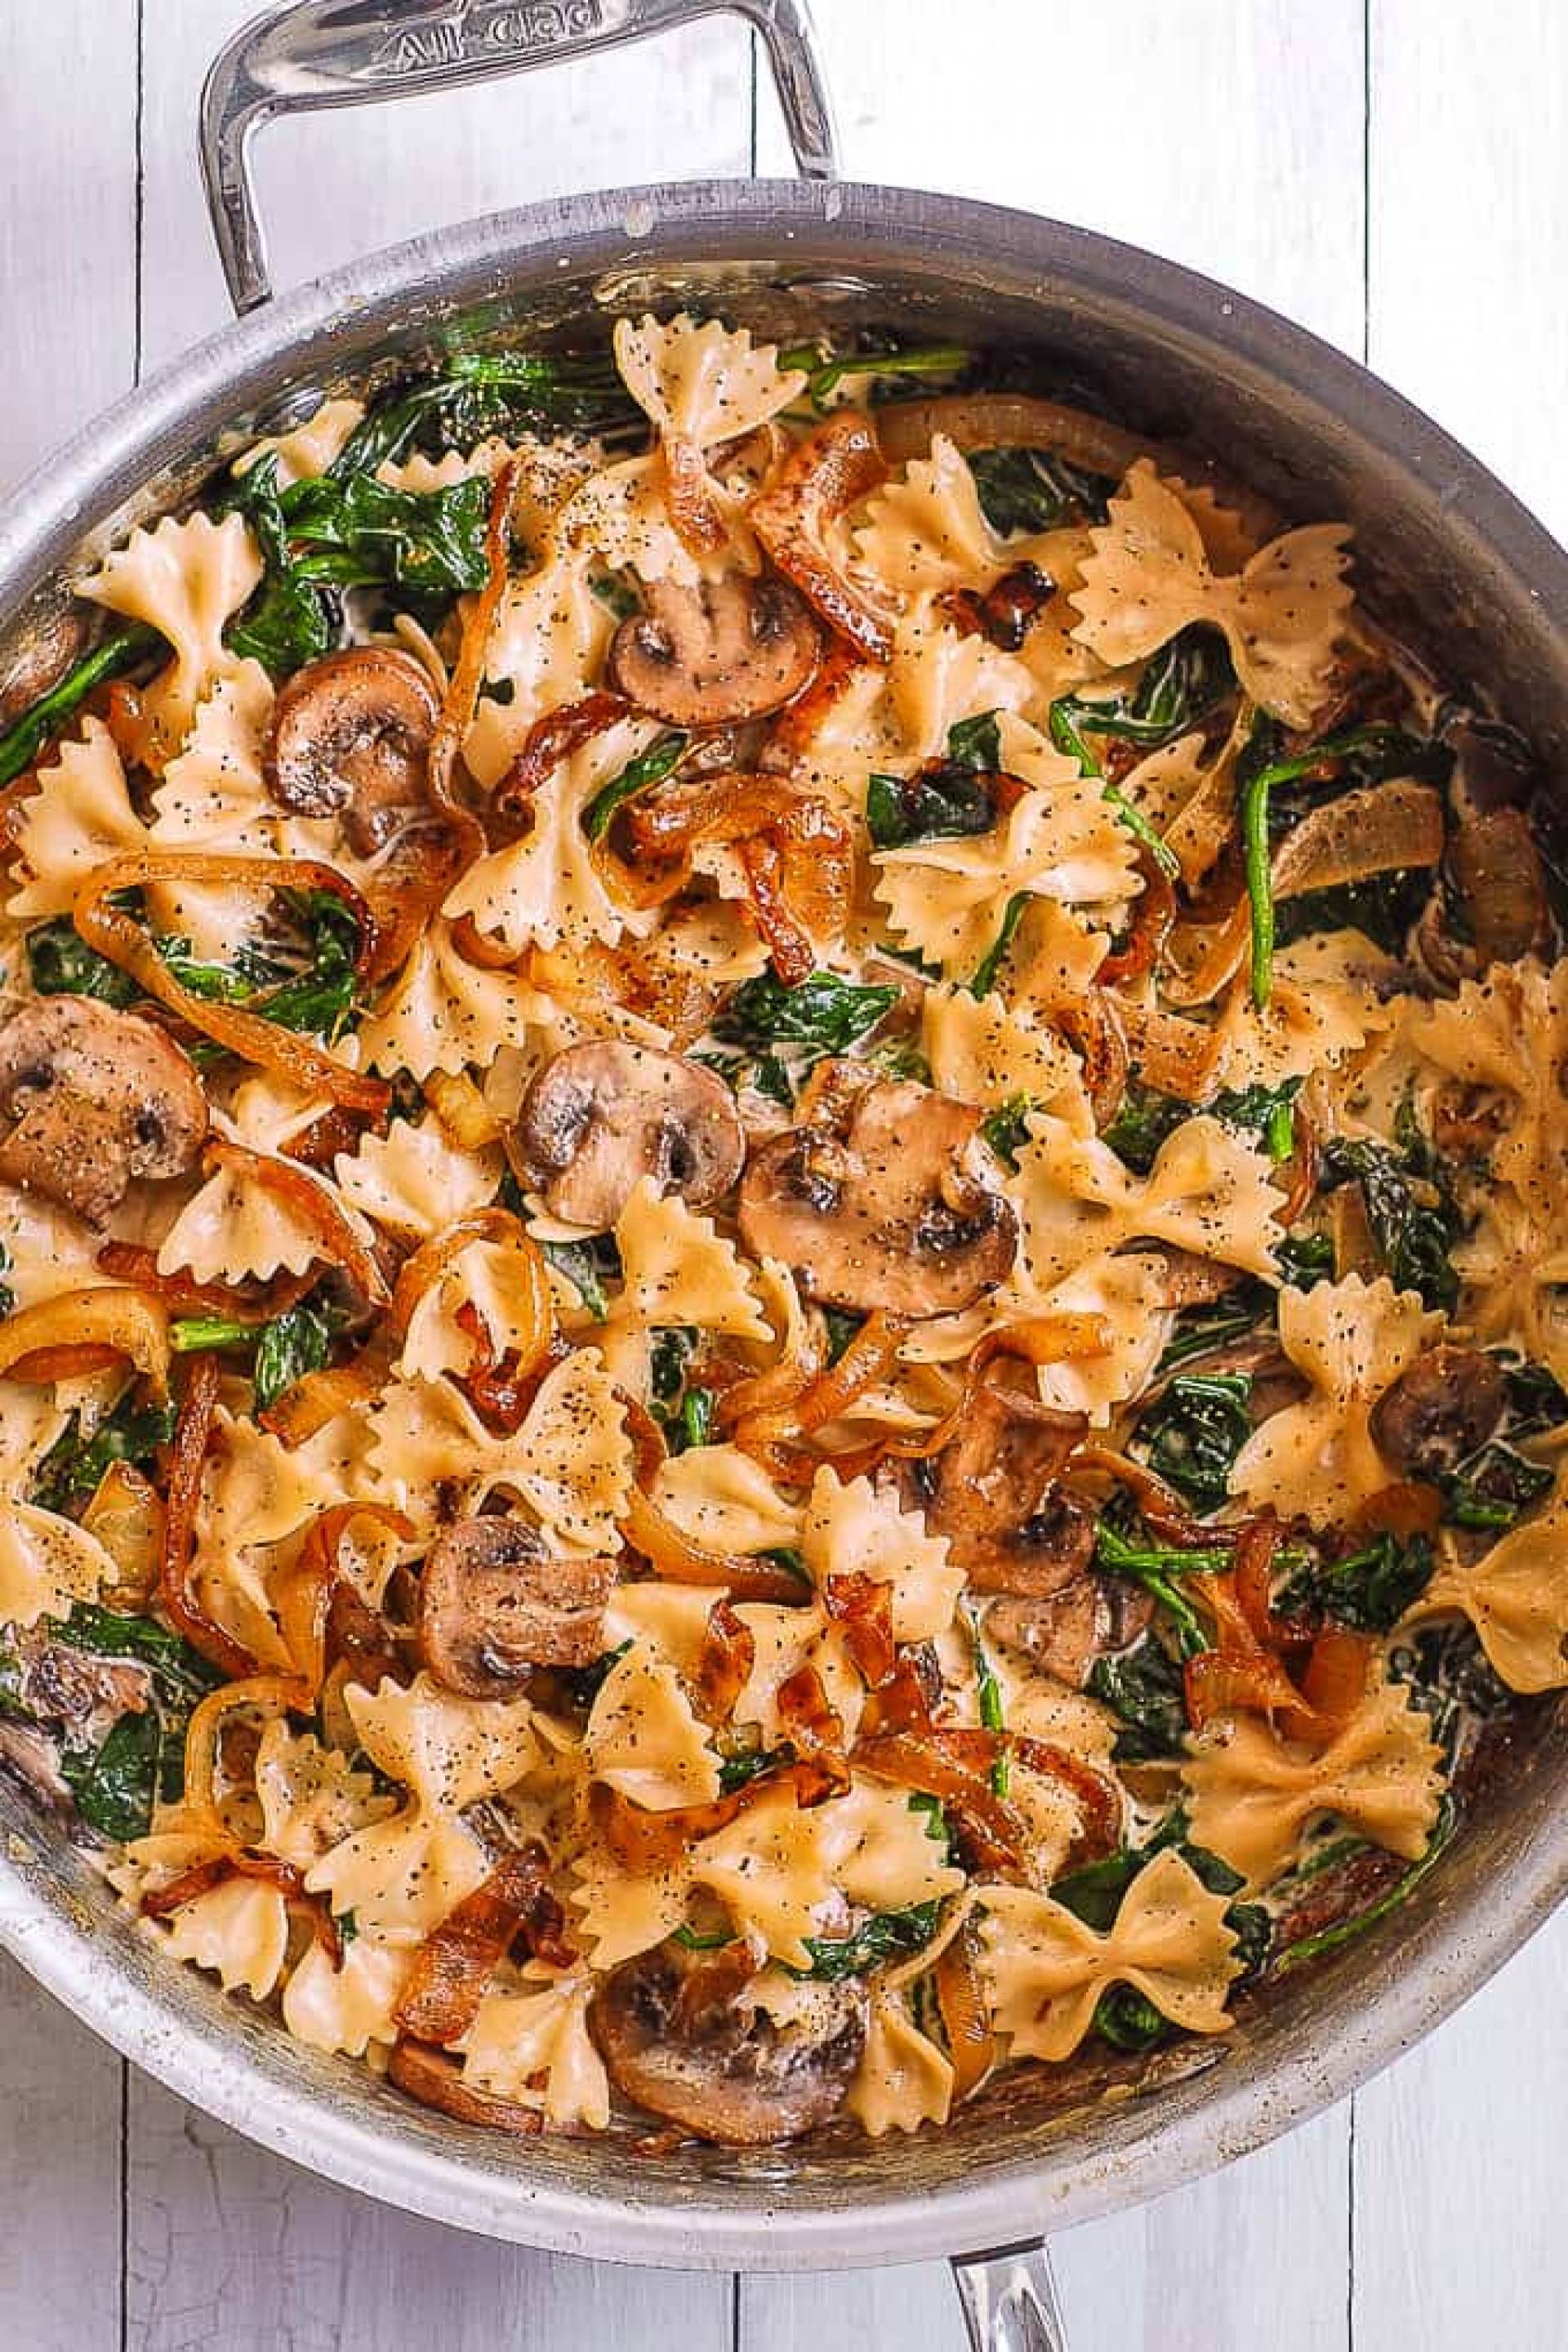 Mushroom Farfalle with Grilled Chicken